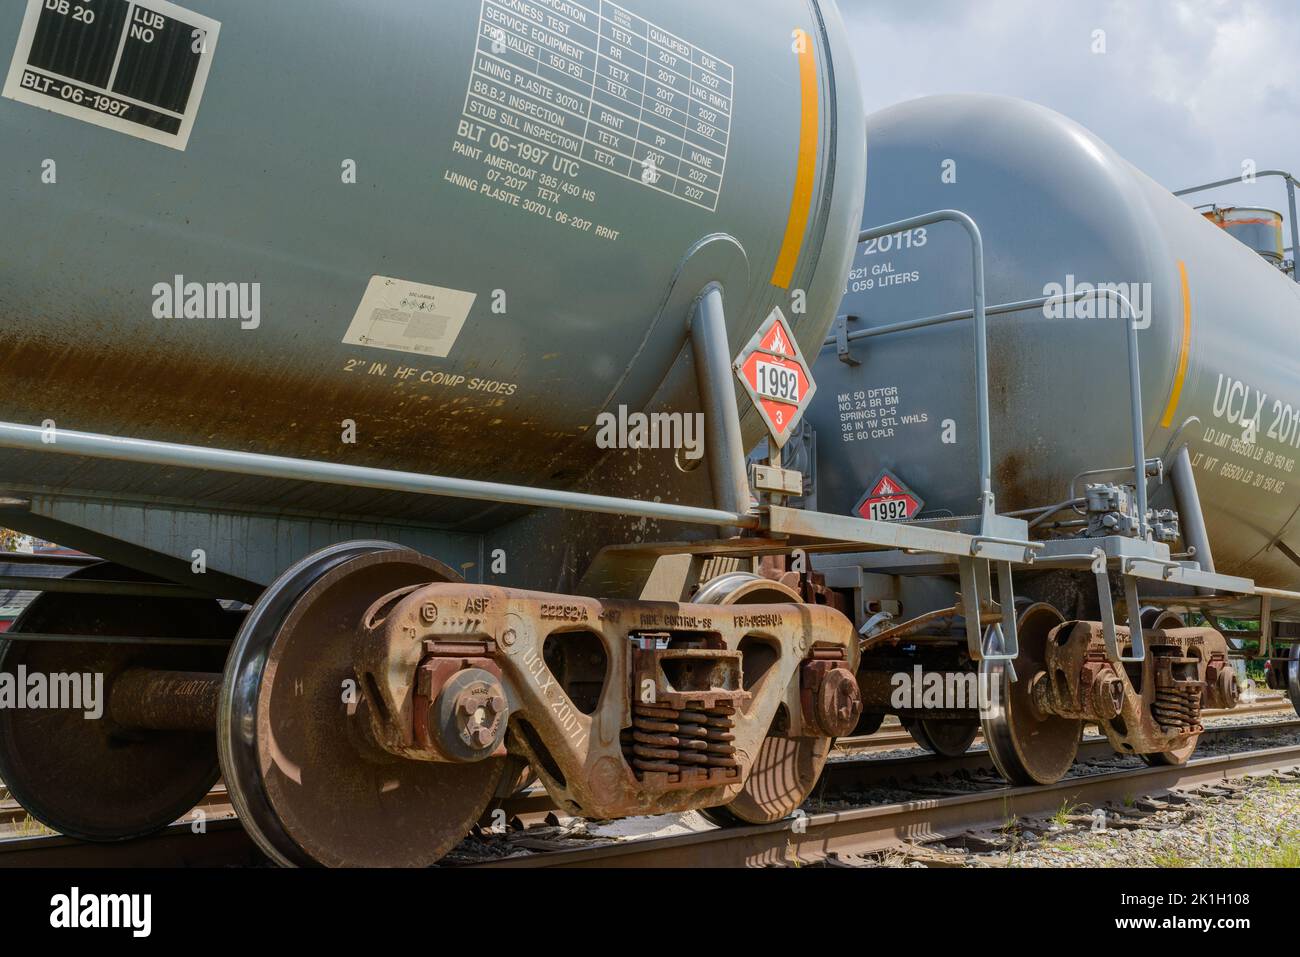 NEW ORLEANS, LA, USA - SEPTEMBER 17, 2022: Two railroad tank cars displaying flammable hazardous materials signs Stock Photo